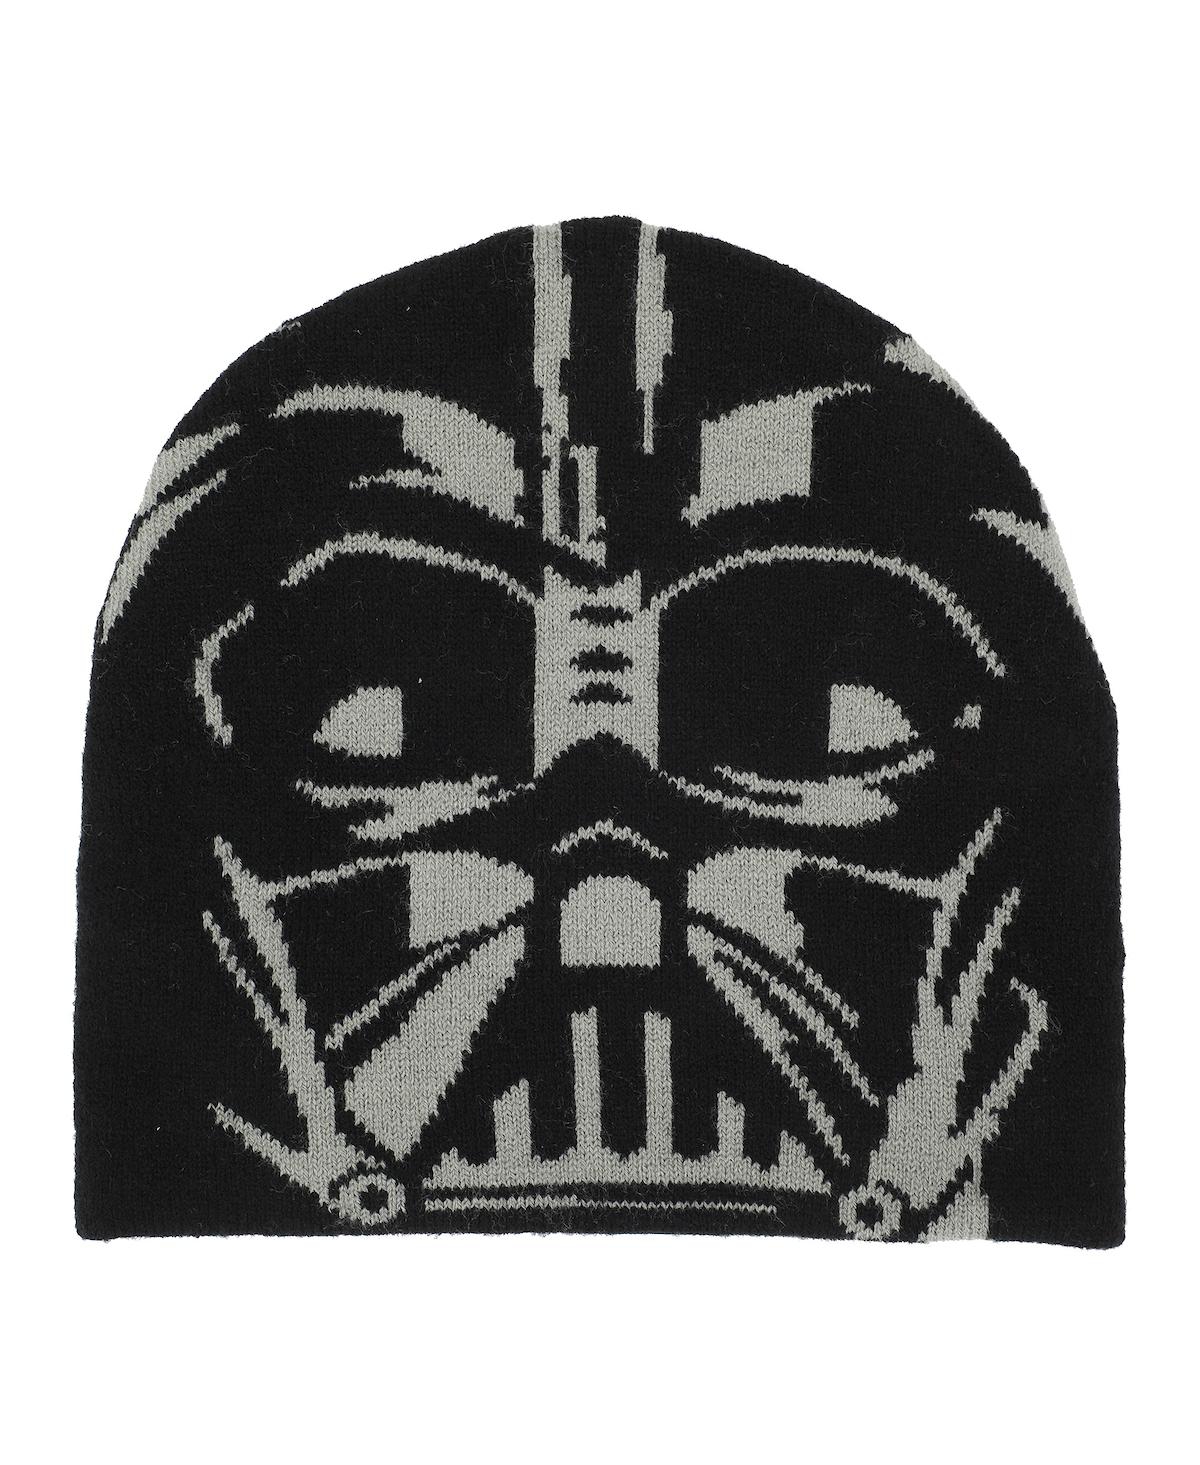 Men's Darth Vader/Death Star Reversible Adult Beanie - Multicolored